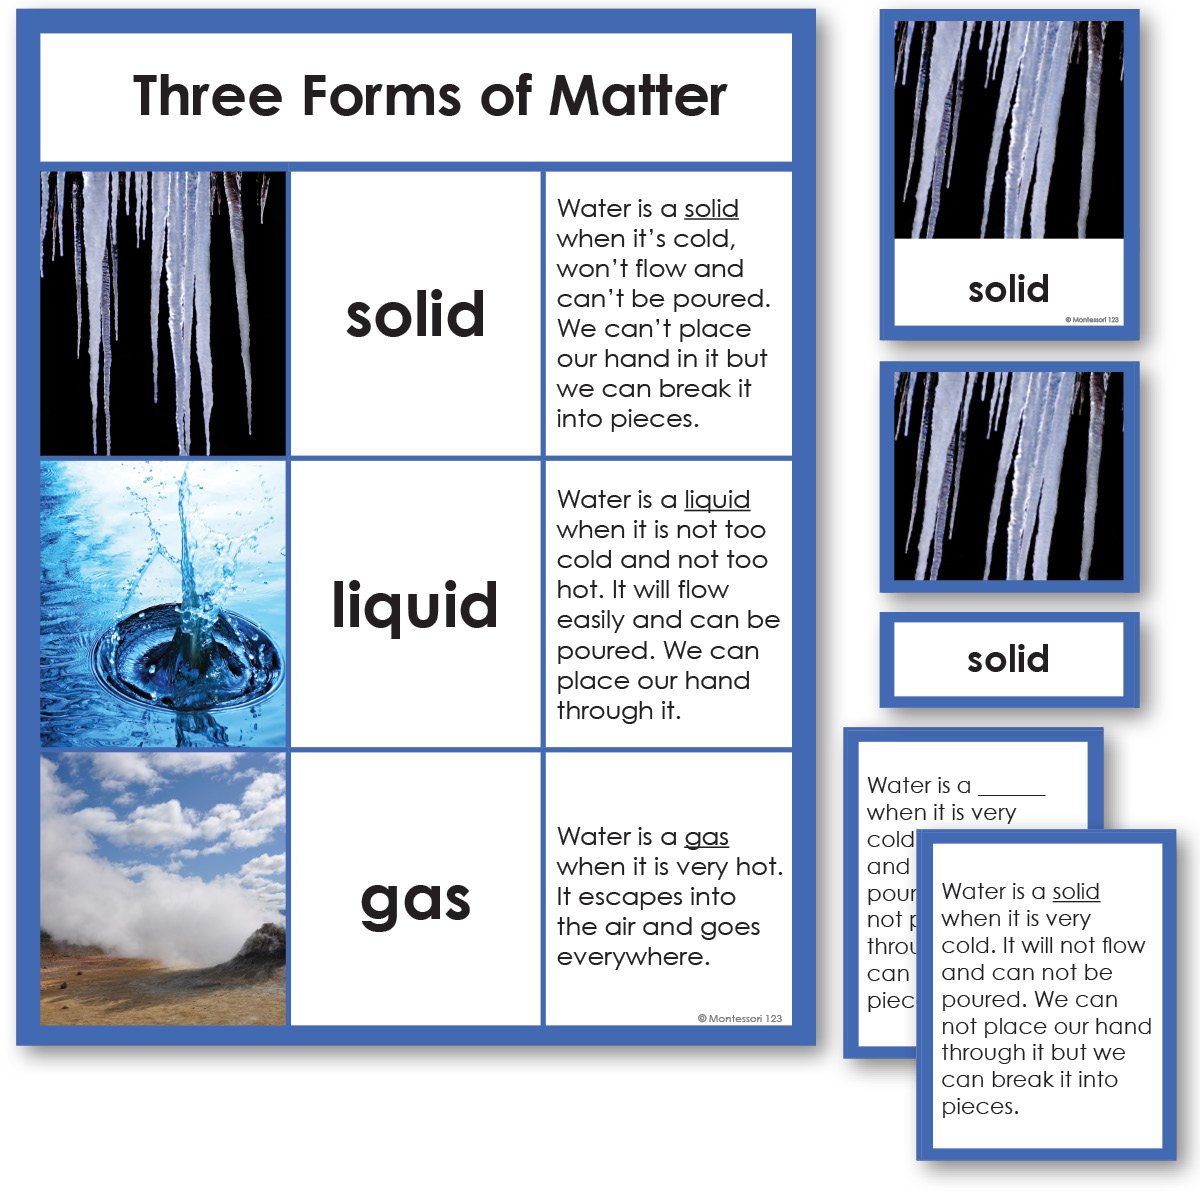 Physical Science-Physics/ Astronomy - Three Forms Of Matter 3-Part Cards With Definitions